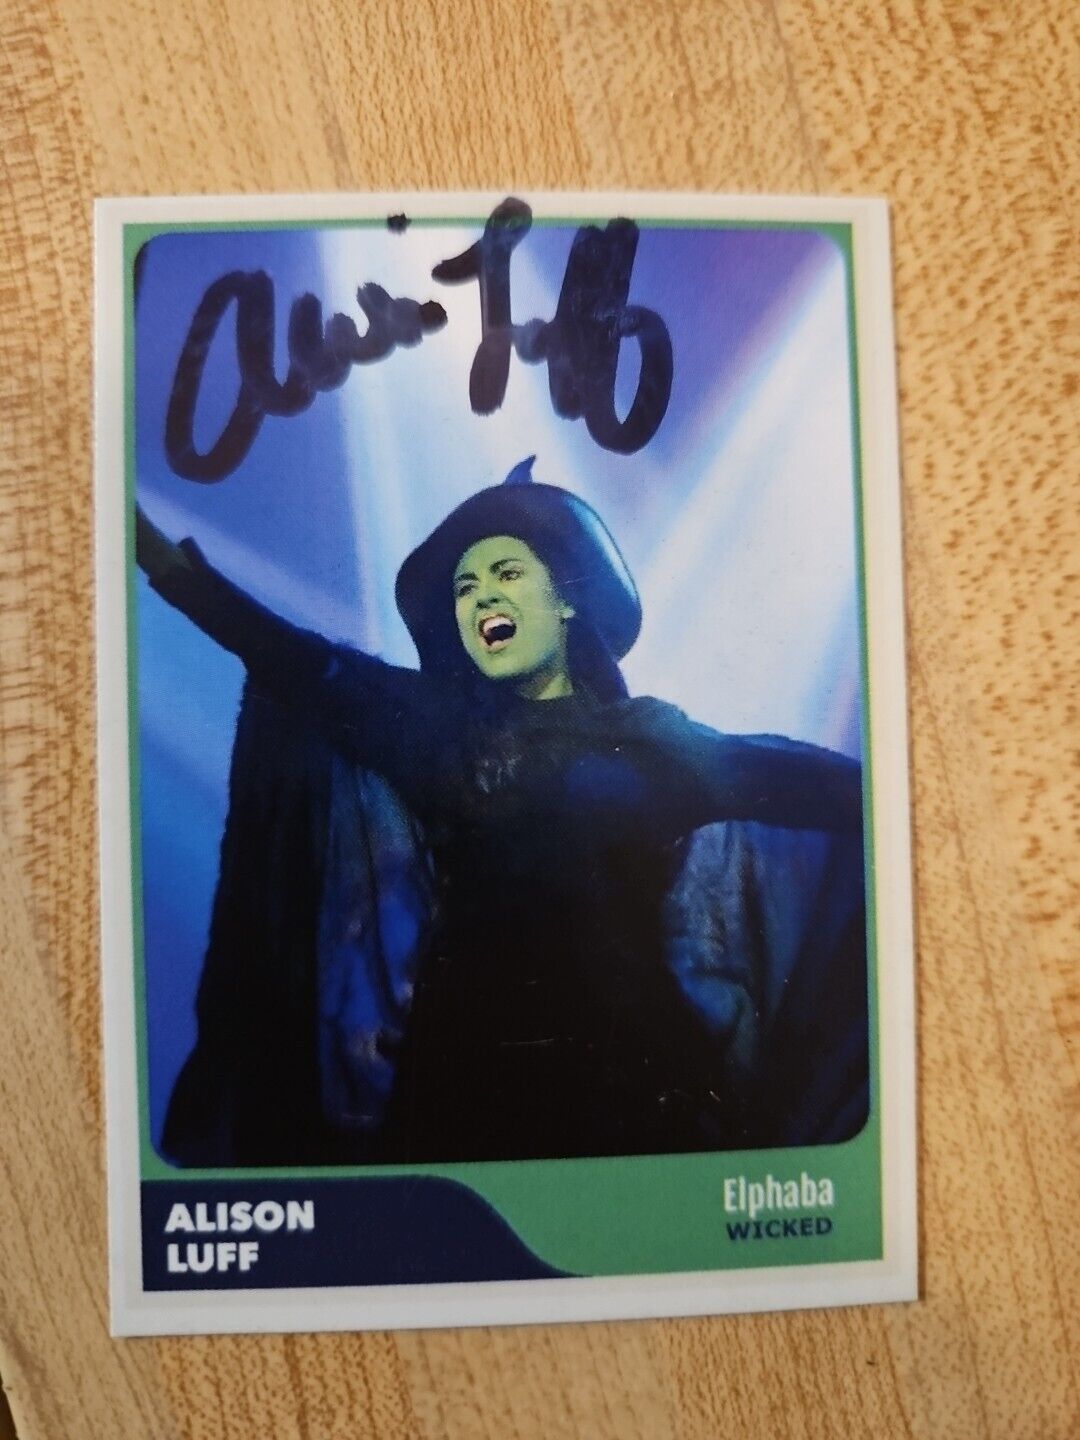 Alison Luff Custom Signed Card - Played Elphaba In Wicked On Broadway